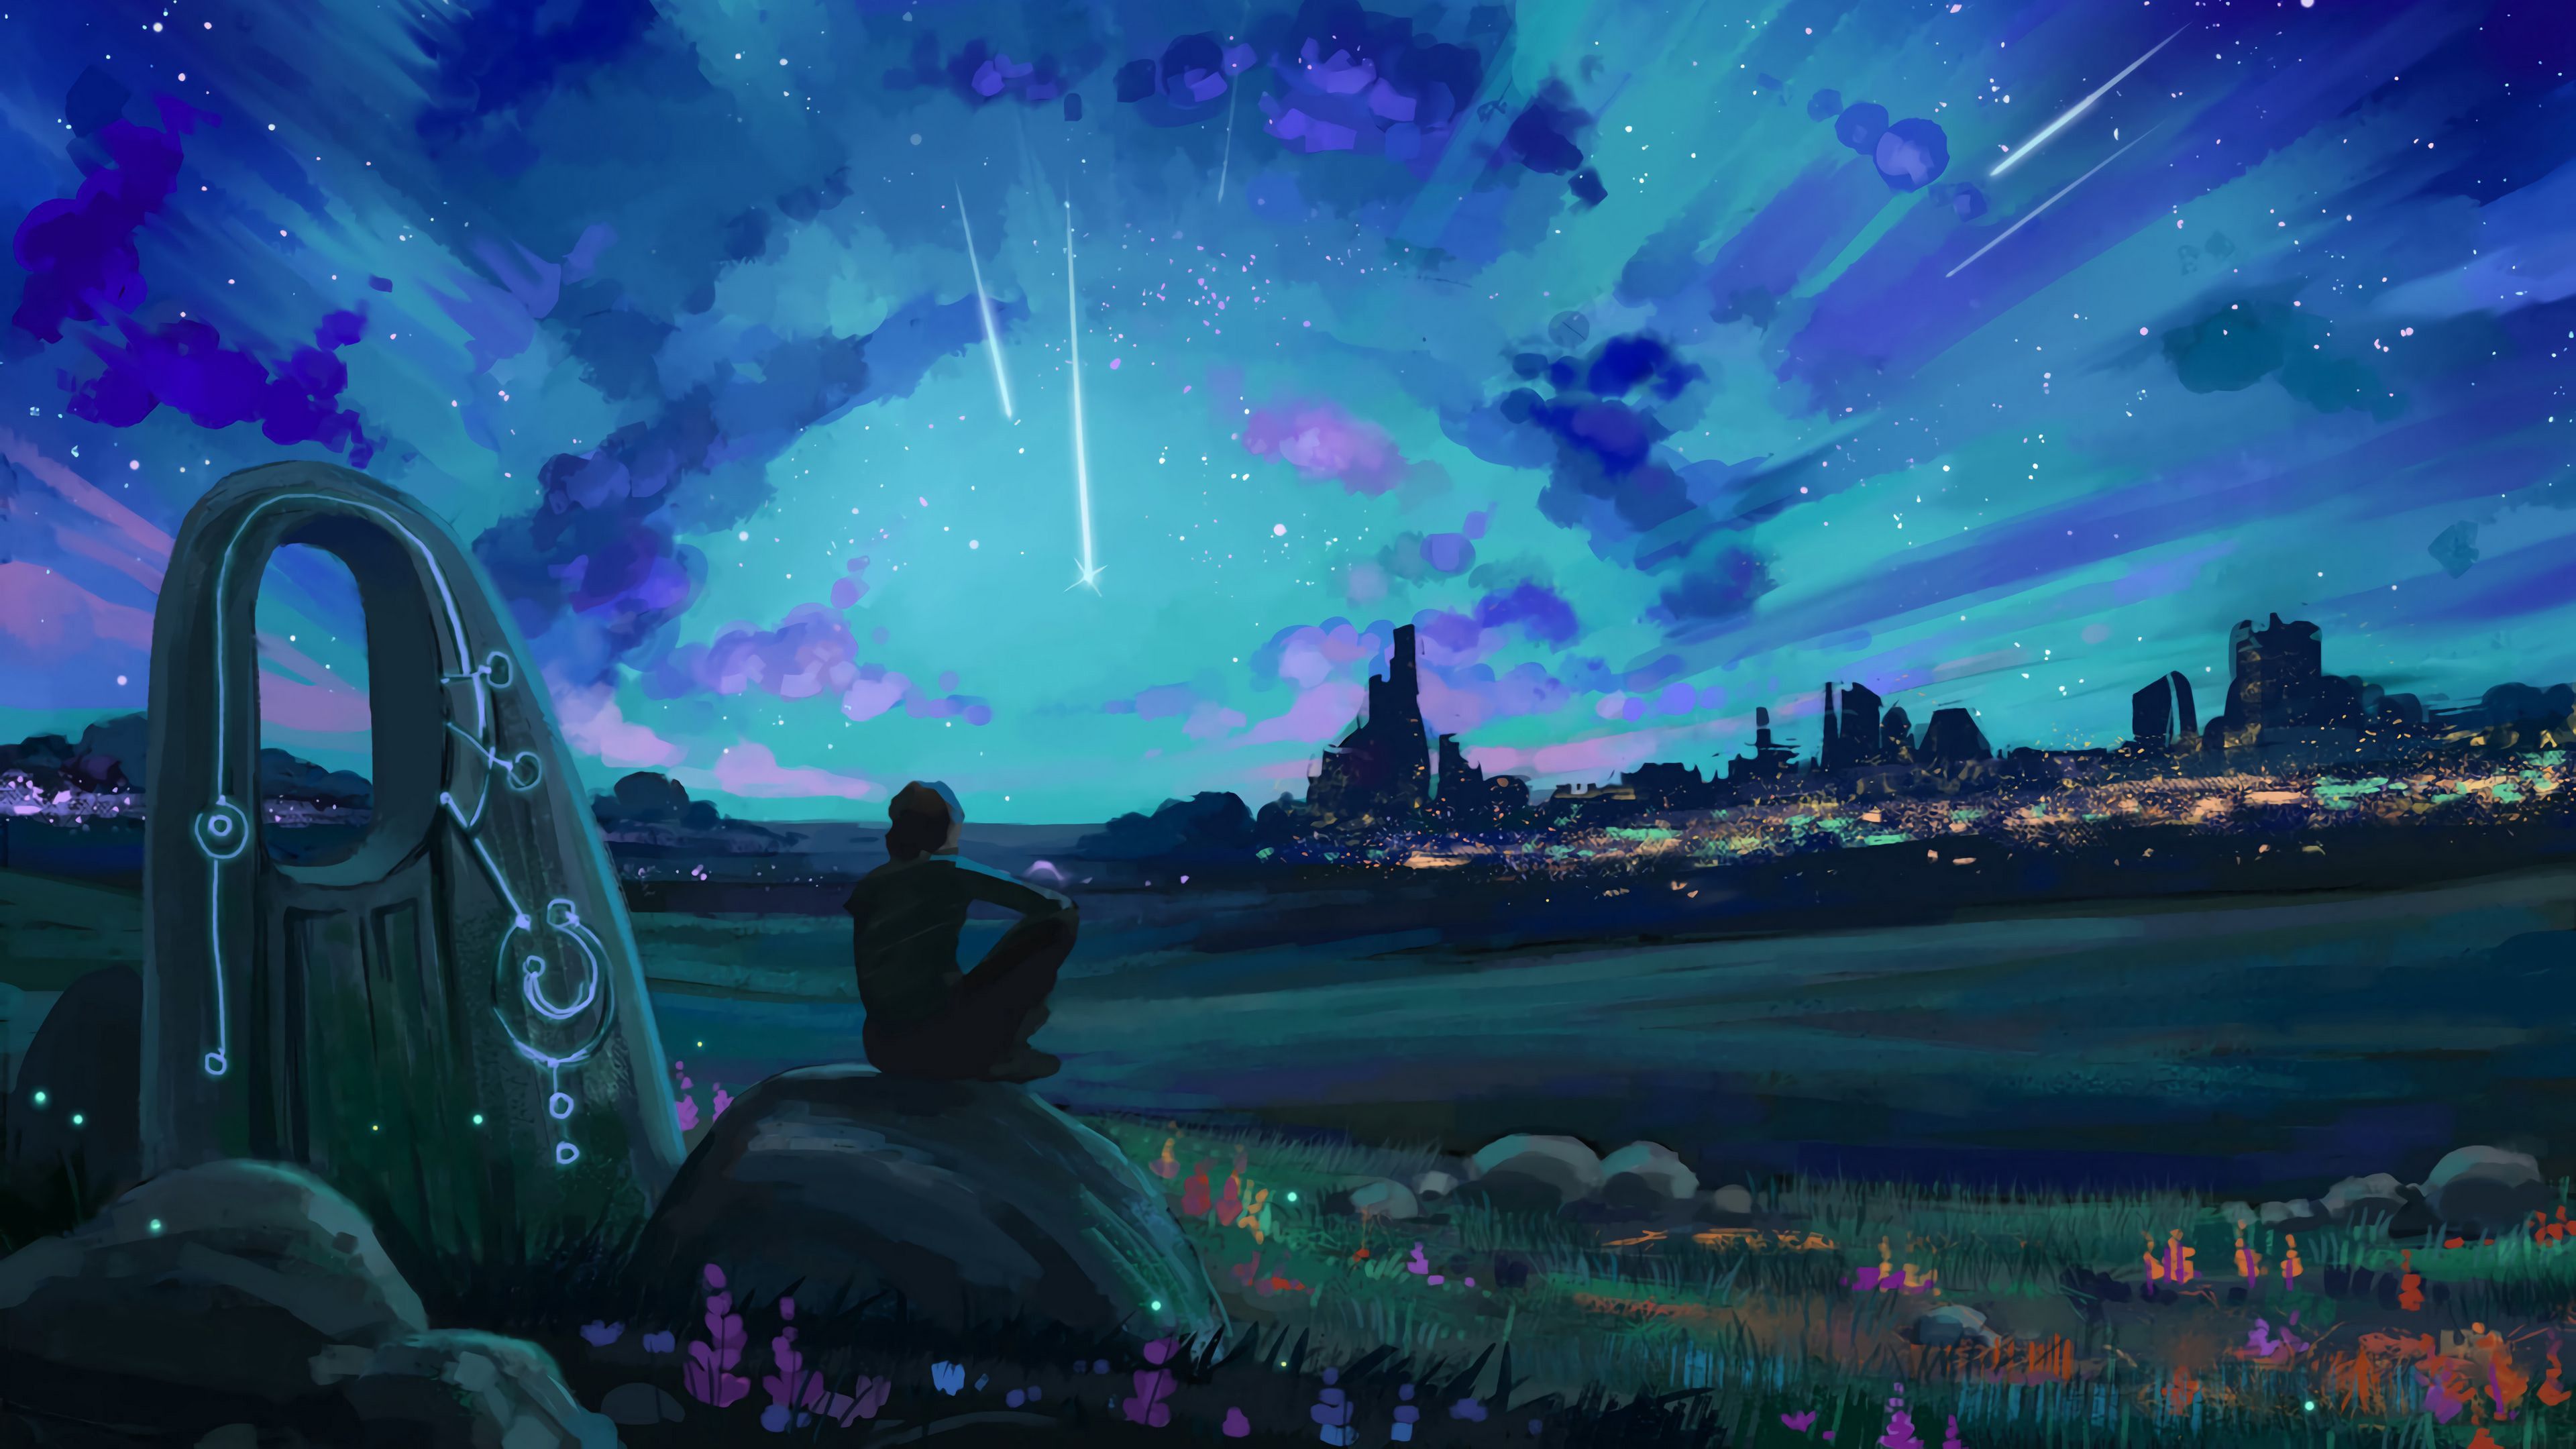 A person sitting on a rock watching shooting stars in the sky - Anime landscape